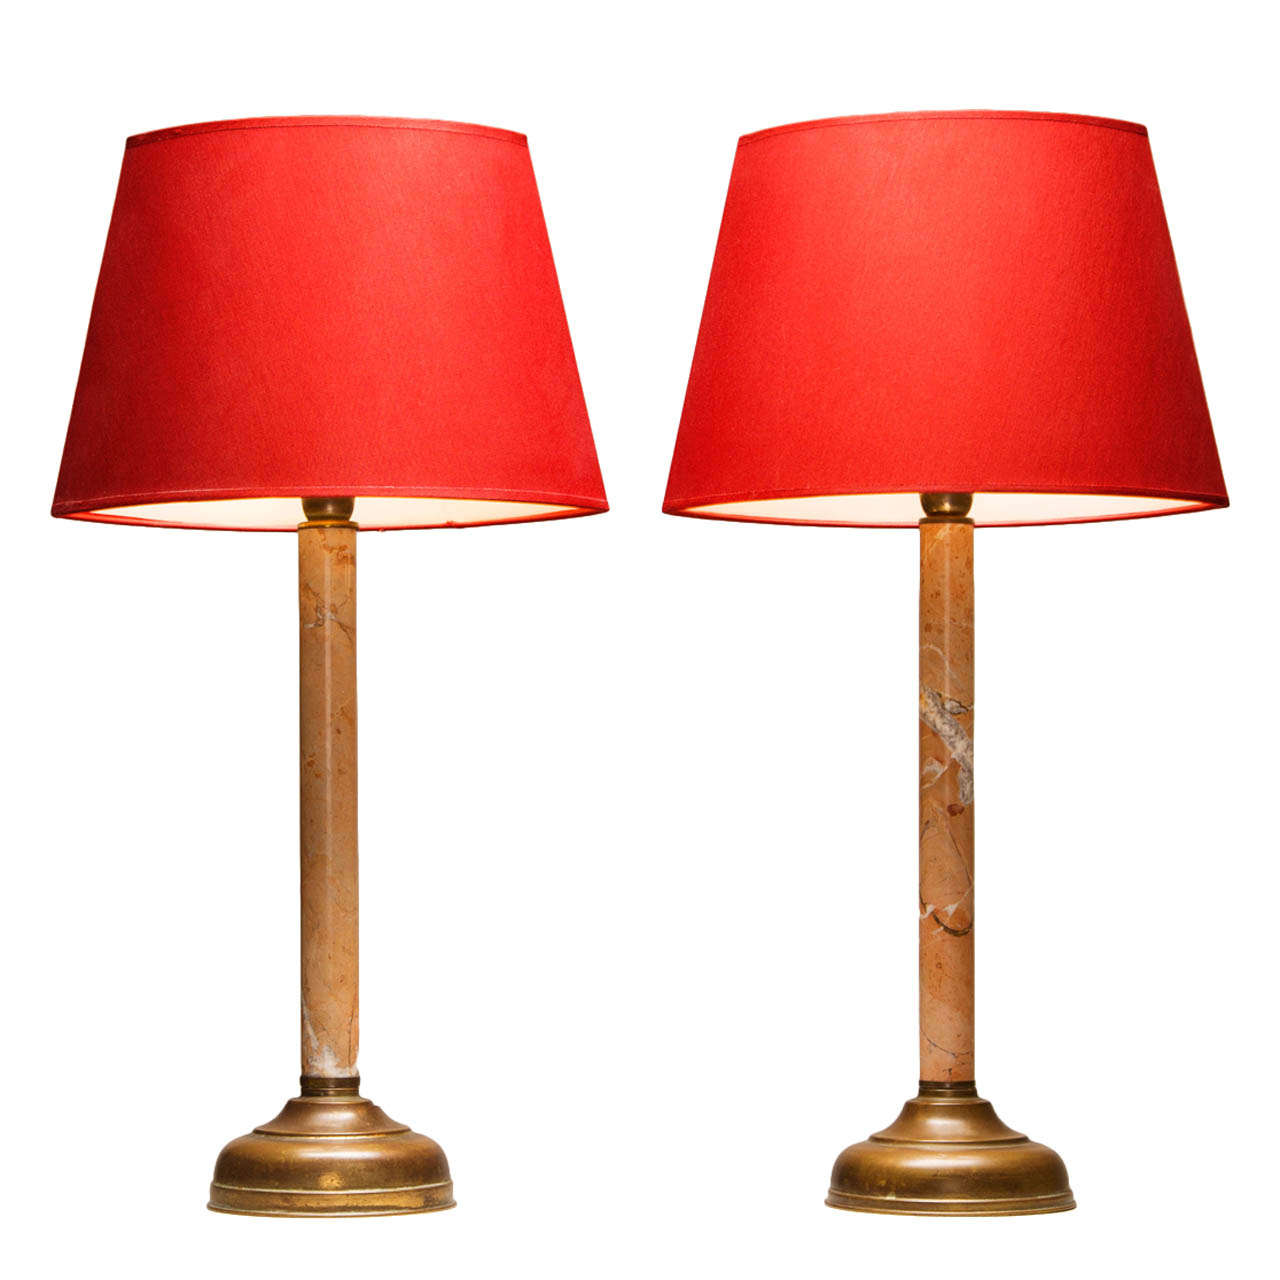 Signed Pair of Tomasso Barbi Table Lamps, Marble and Brass